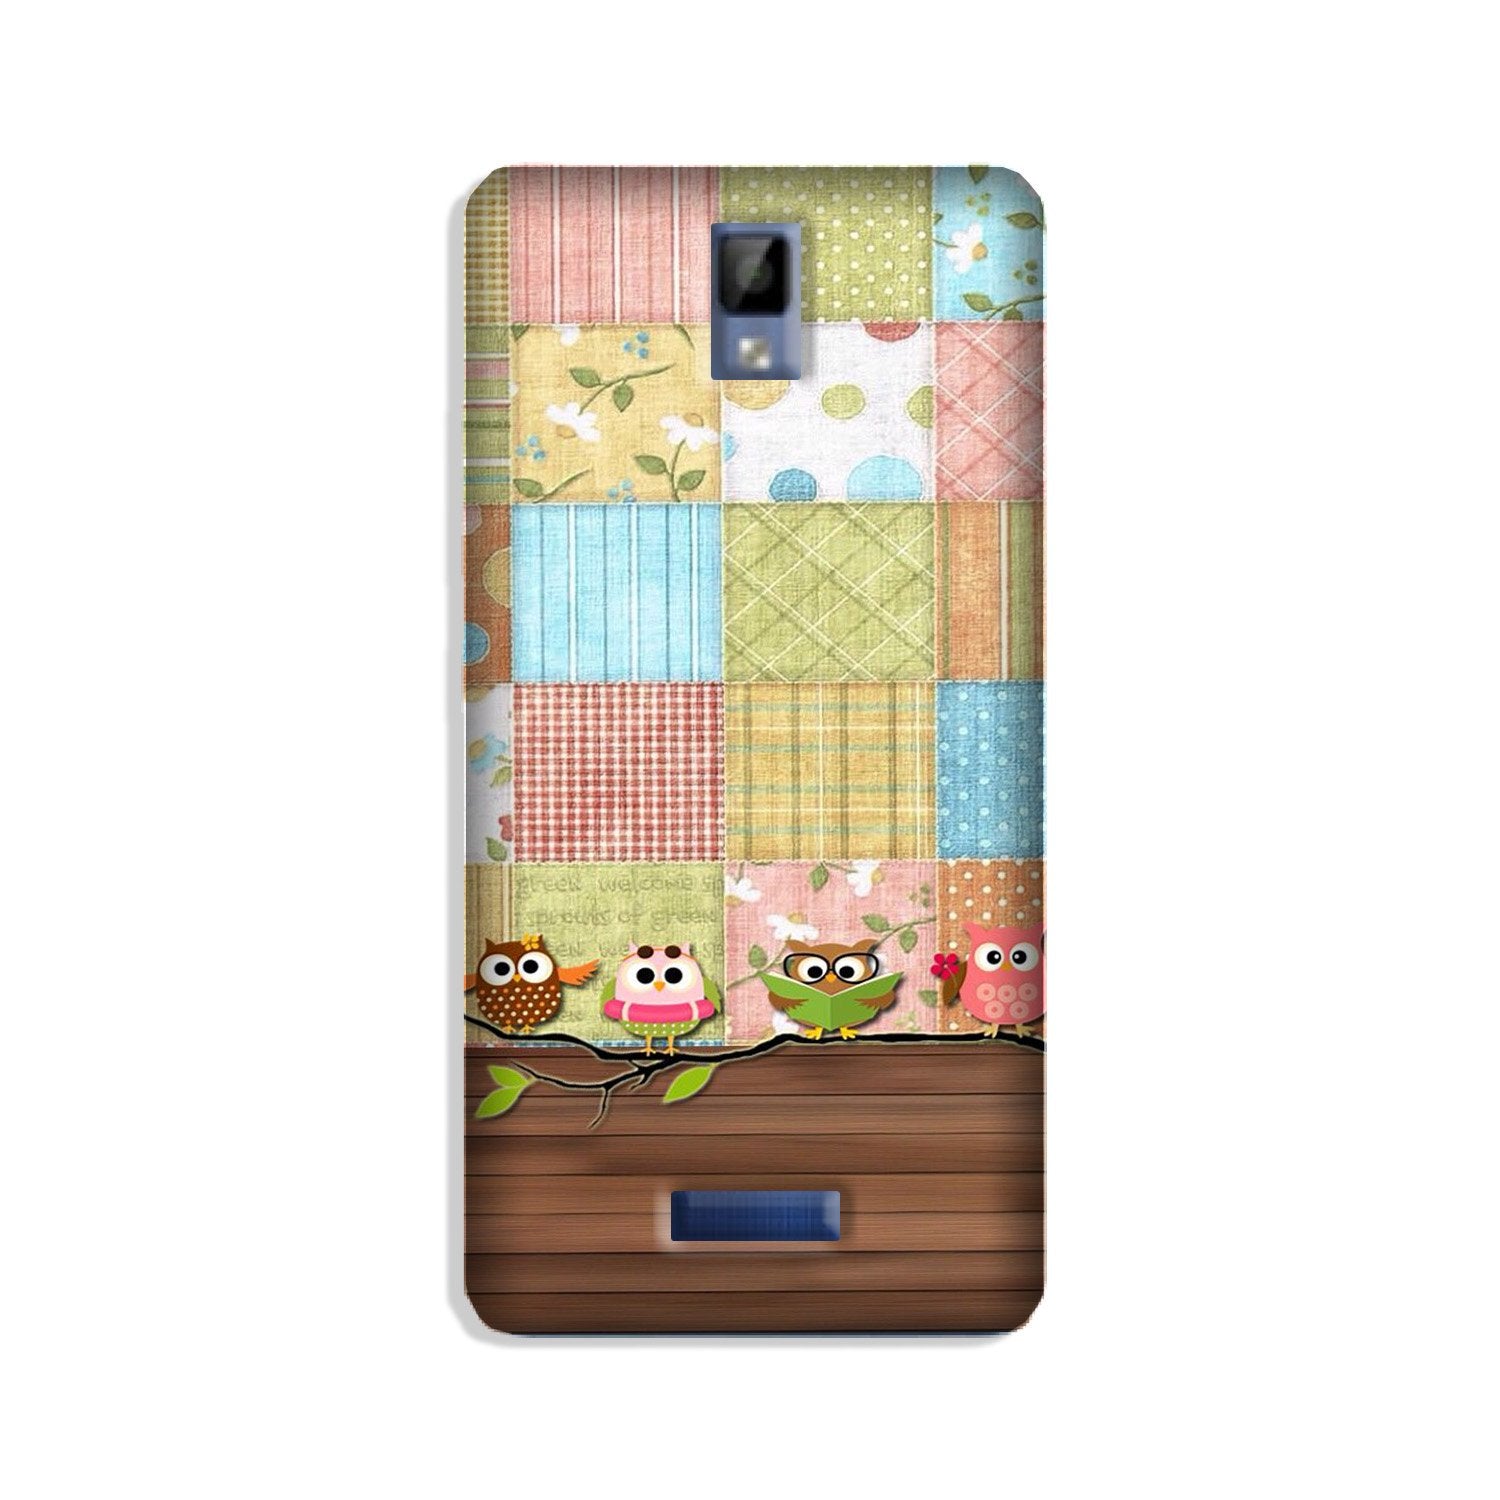 Owls Case for Gionee P7 (Design - 202)